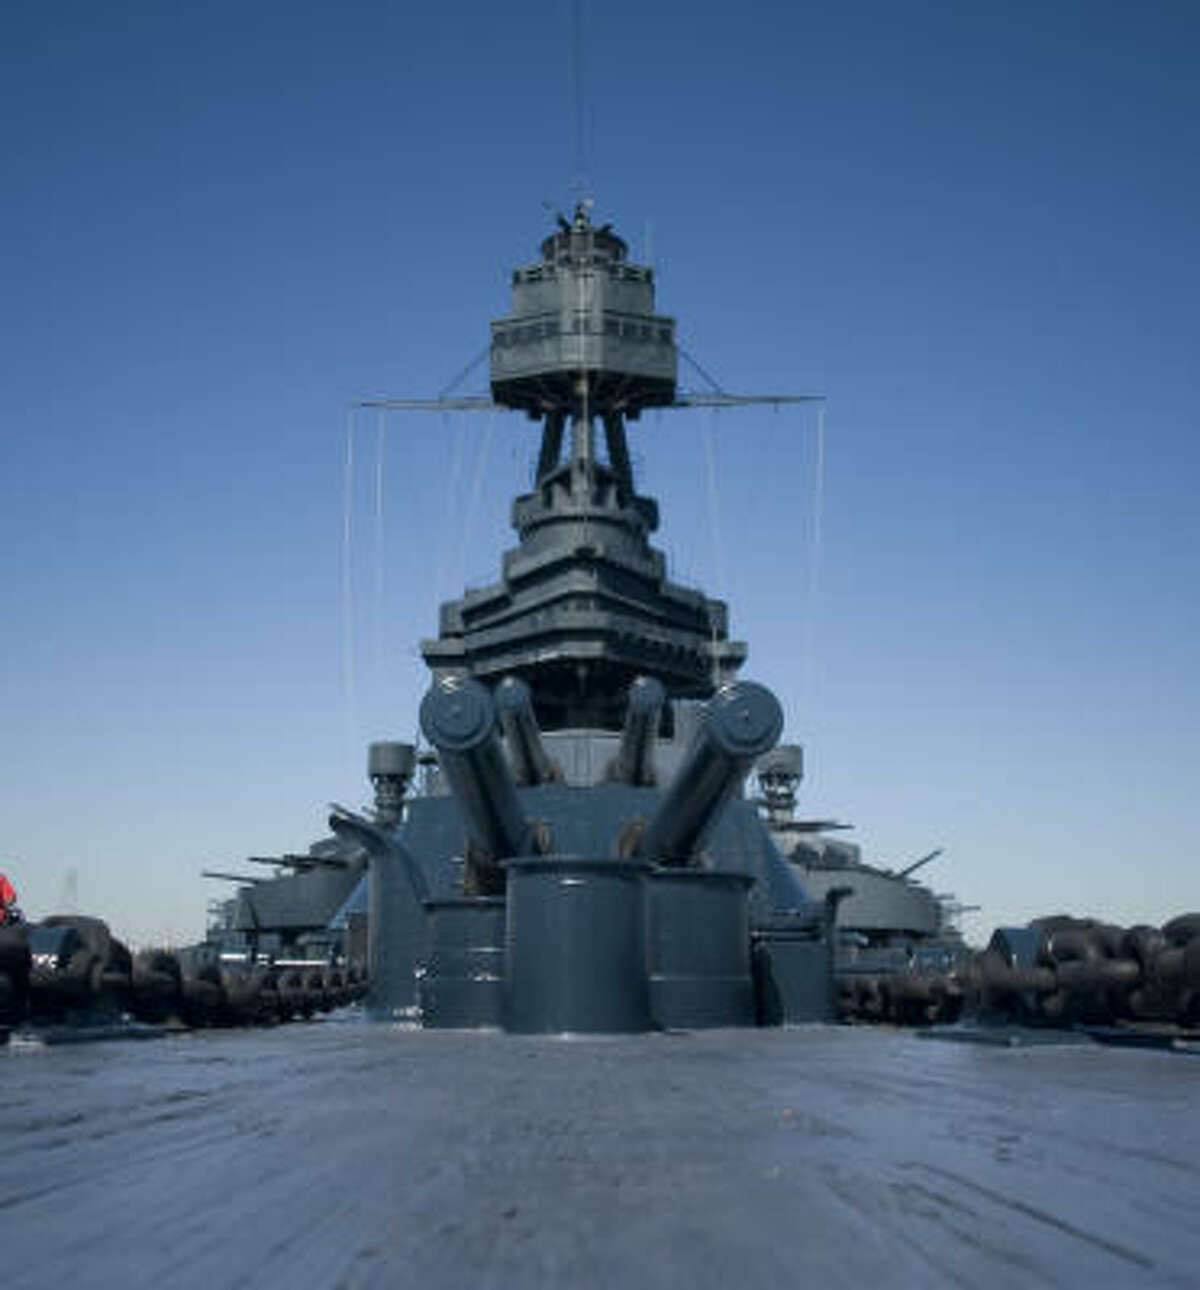 Officials are awaiting final approval from the state for a $25 million bond sale to pay for moving the Battleship Texas to permanent dry dock.